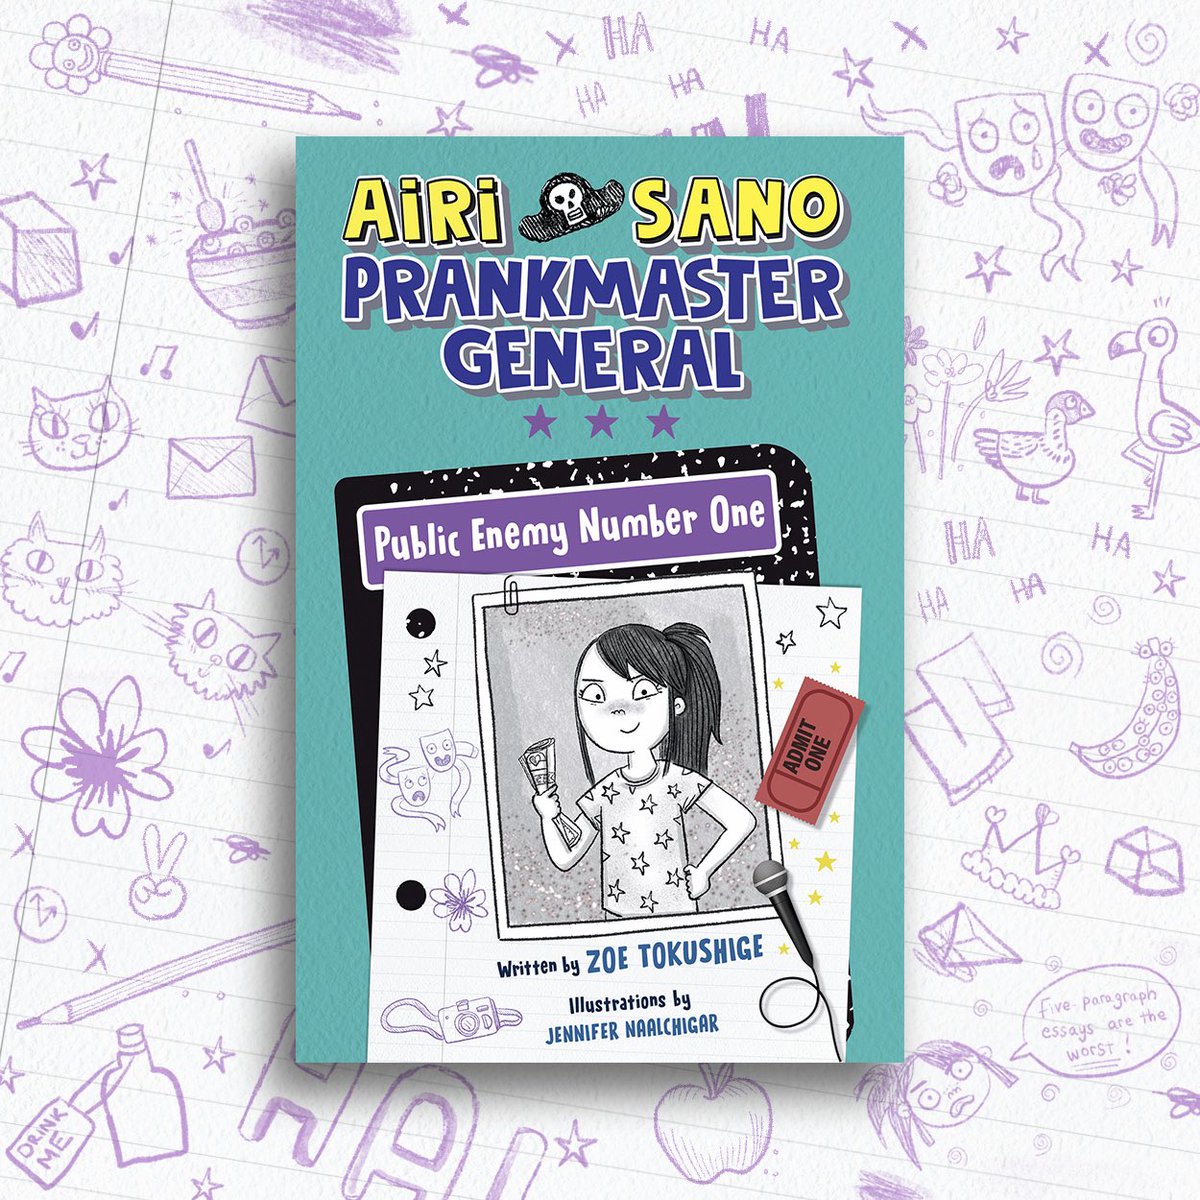 Airi is back — and this time, there’s drama! Don’t miss the second book in this hilarious new series, PUBLIC ENEMY NUMBER ONE. On shelves everywhere today! Happy #bookbirthday, @zoetokushige and @naalchidraws!!